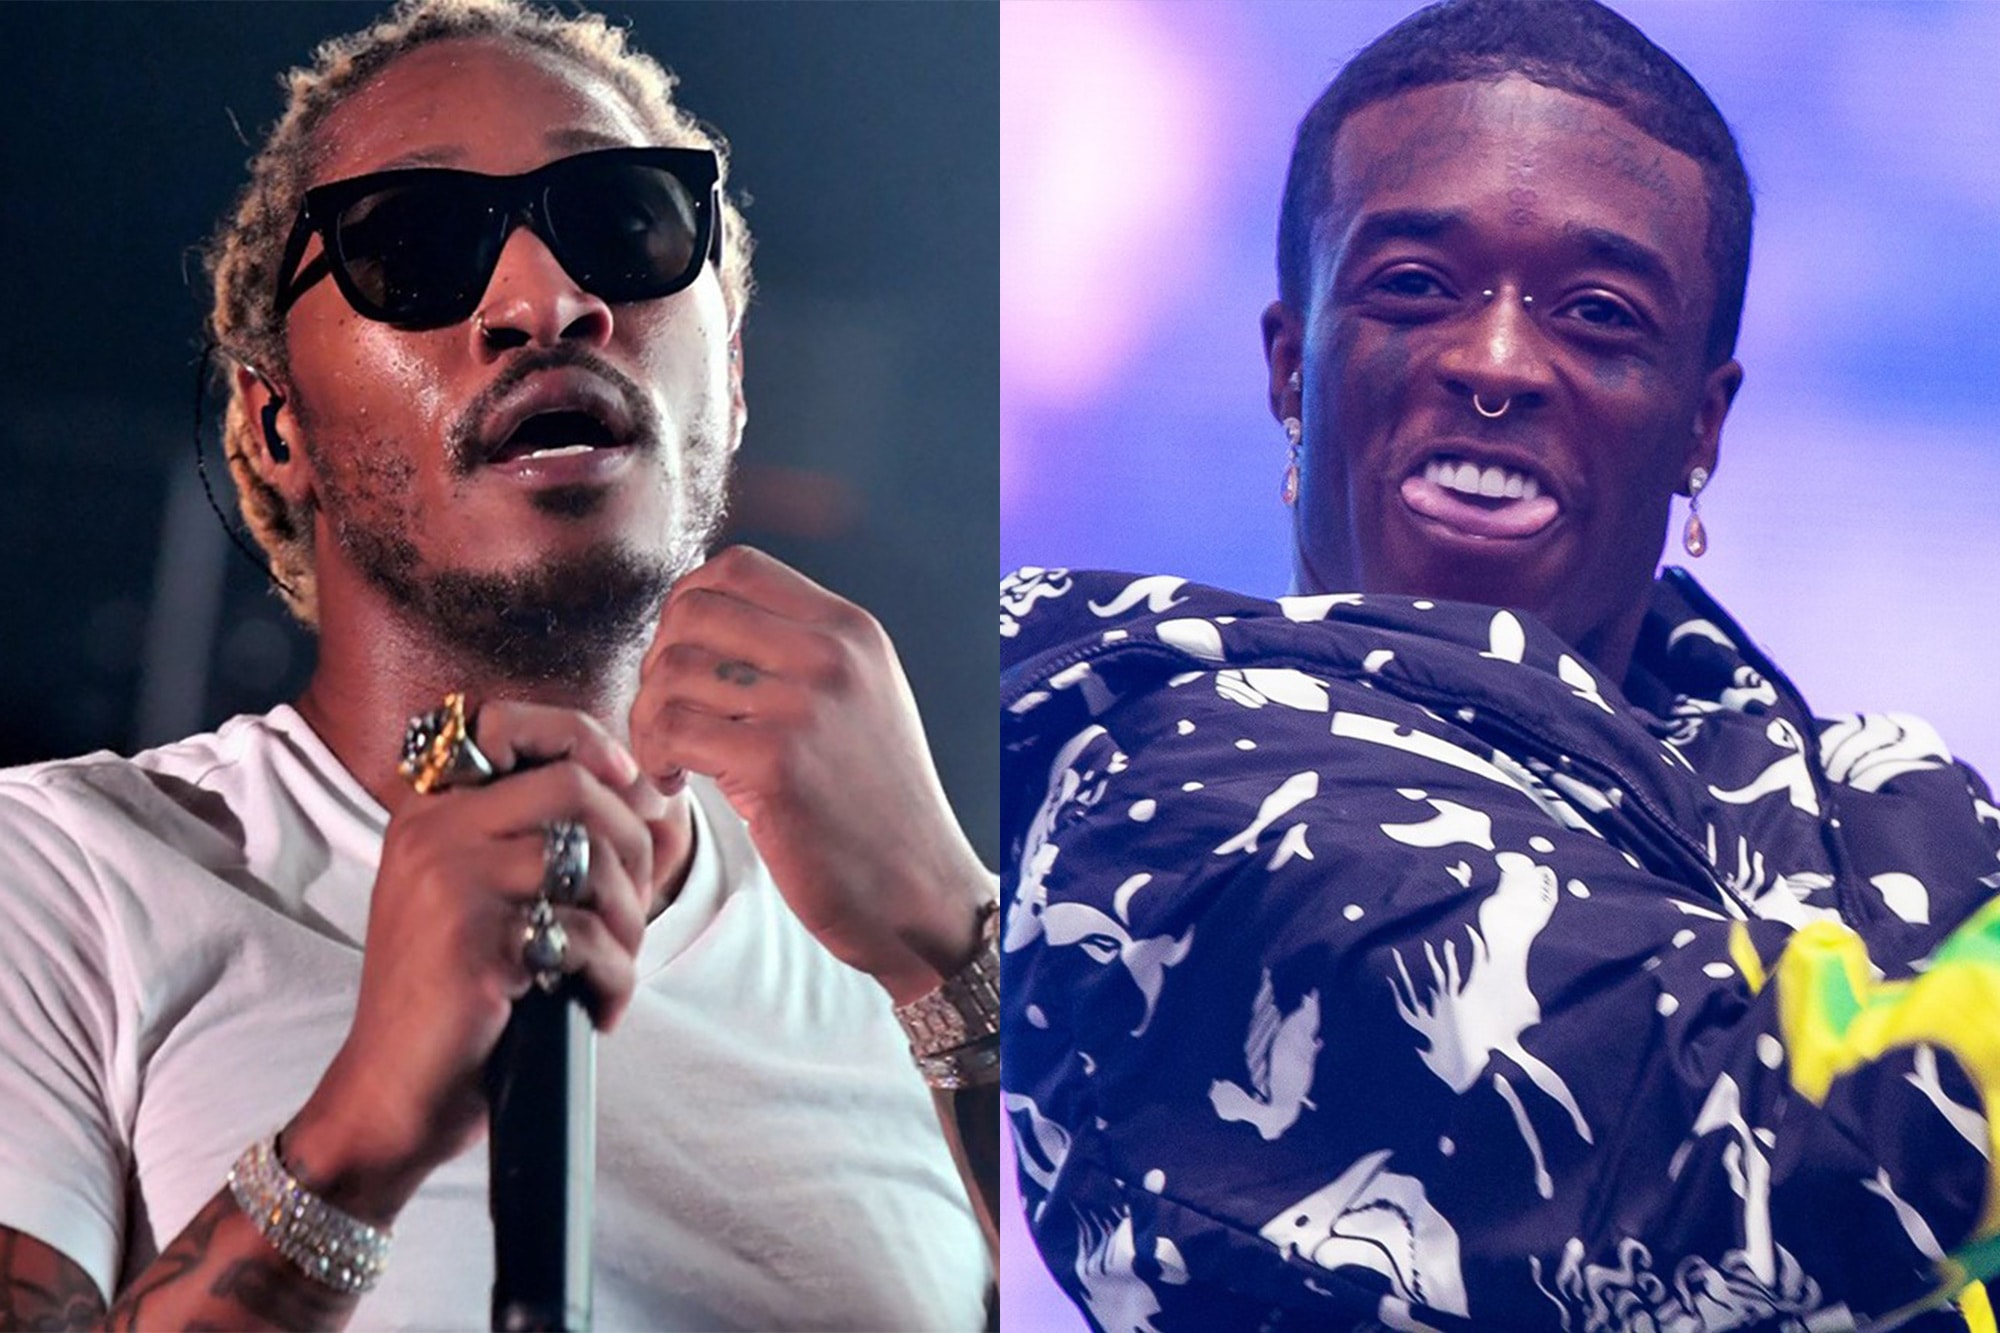 Lil Uzi Vert and Future Tease Upcoming Collaboration Luv Is Rage 2 High Off Life Music Videos Video Best New Tracks July 31 2020 News Rap Hip Hop HipHop Rapper 